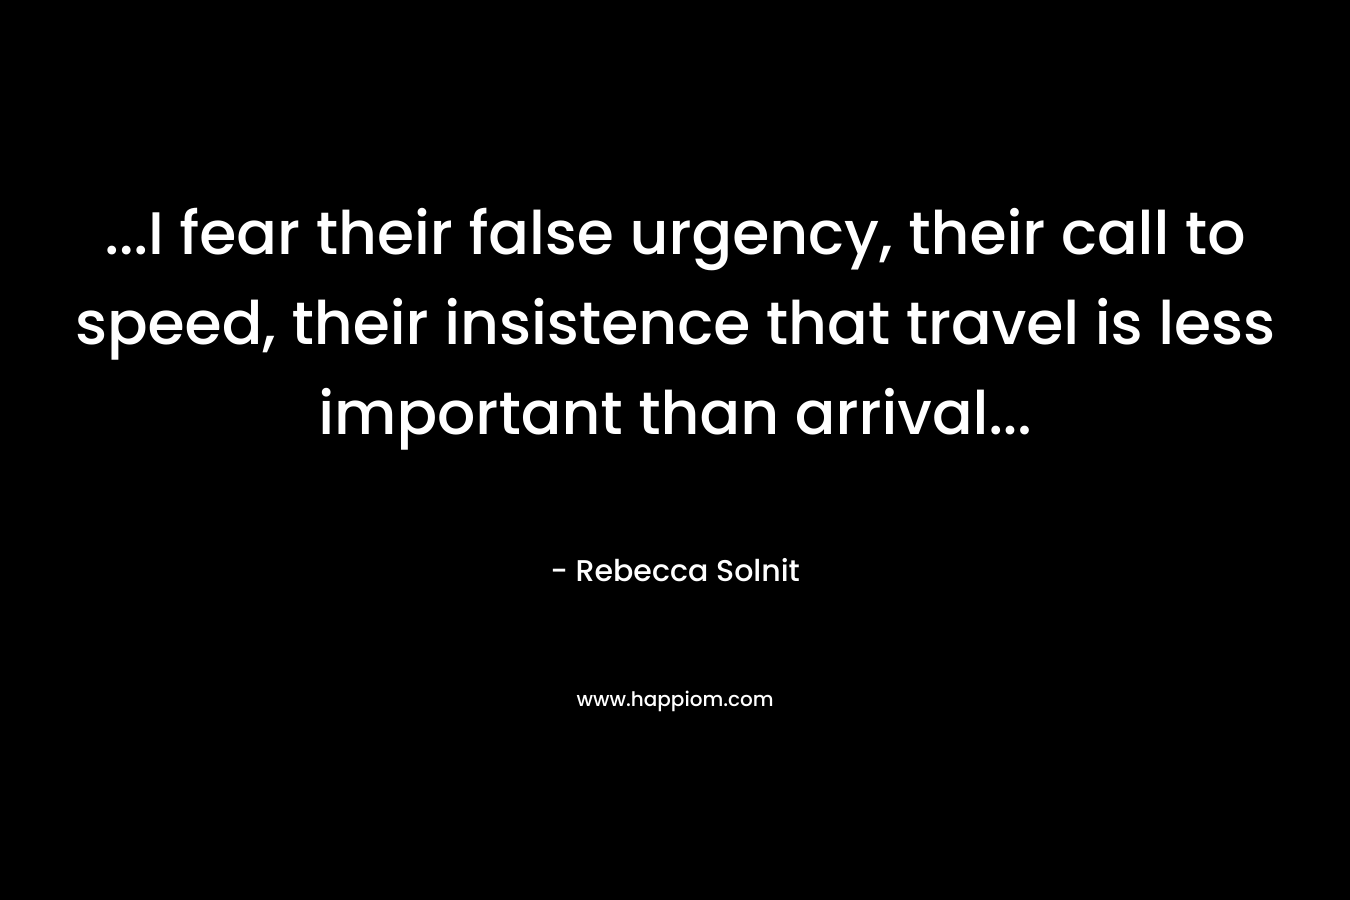 ...I fear their false urgency, their call to speed, their insistence that travel is less important than arrival...